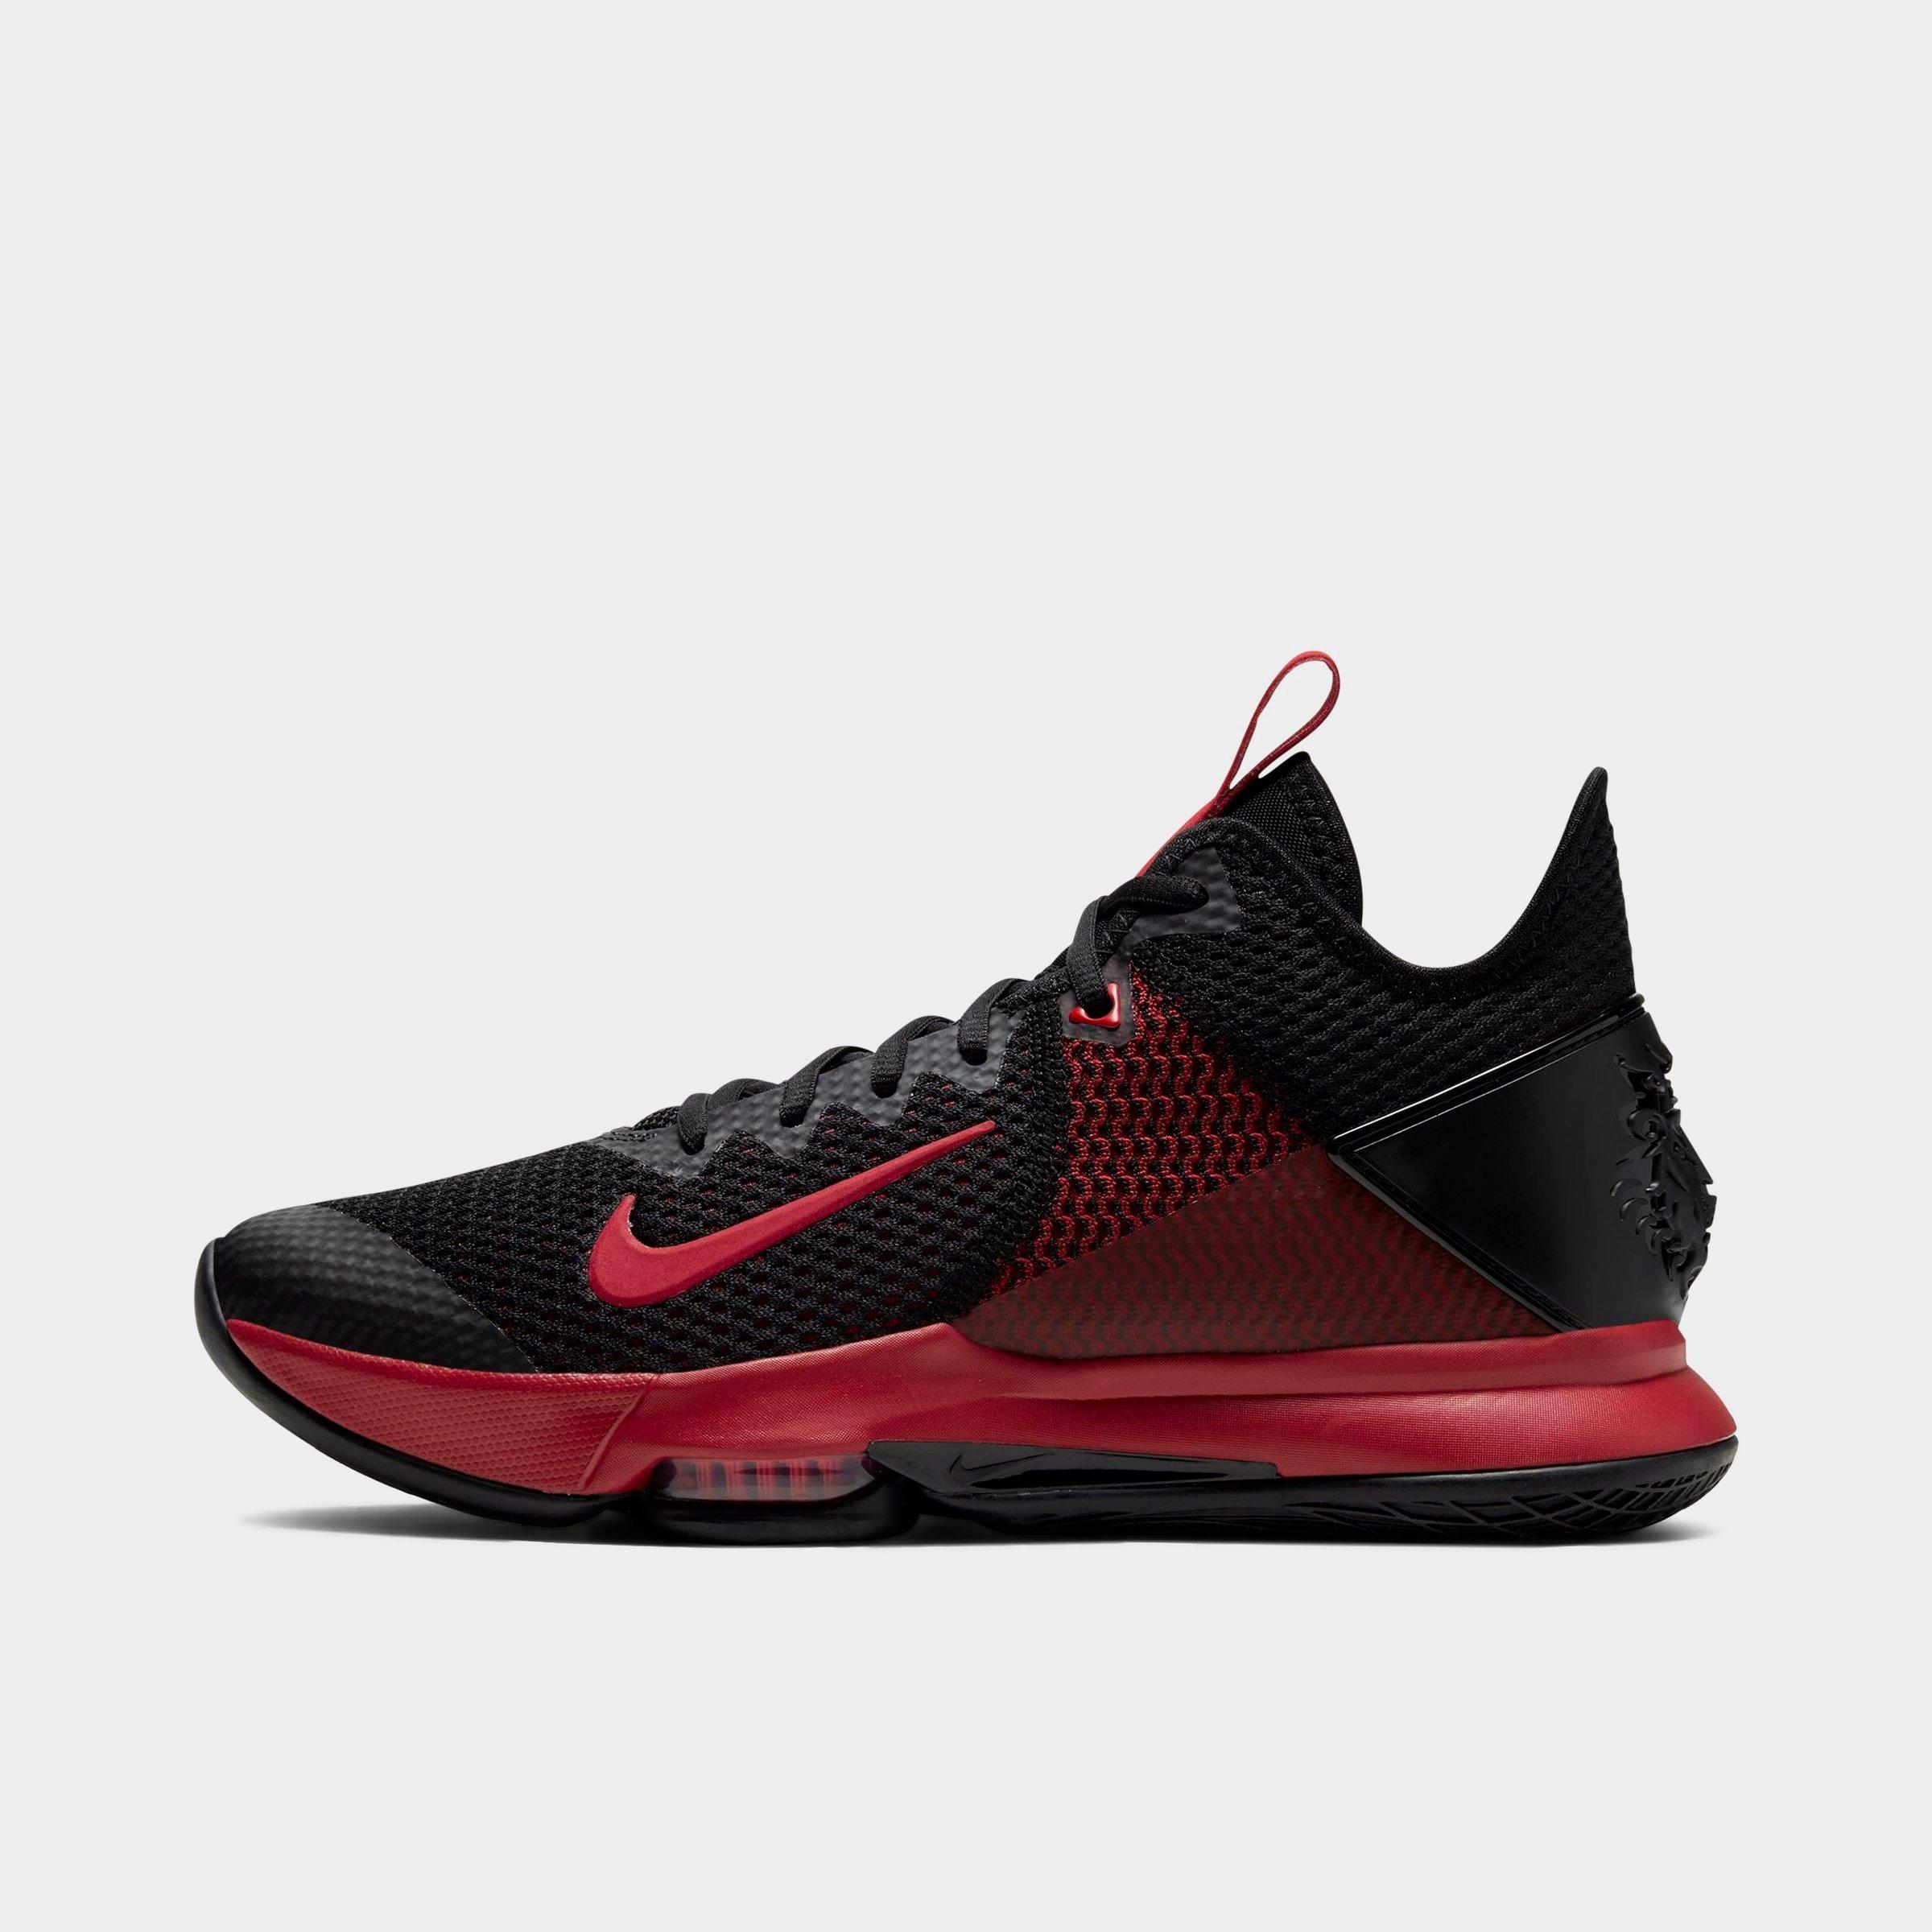 lebron witness 4 gym red